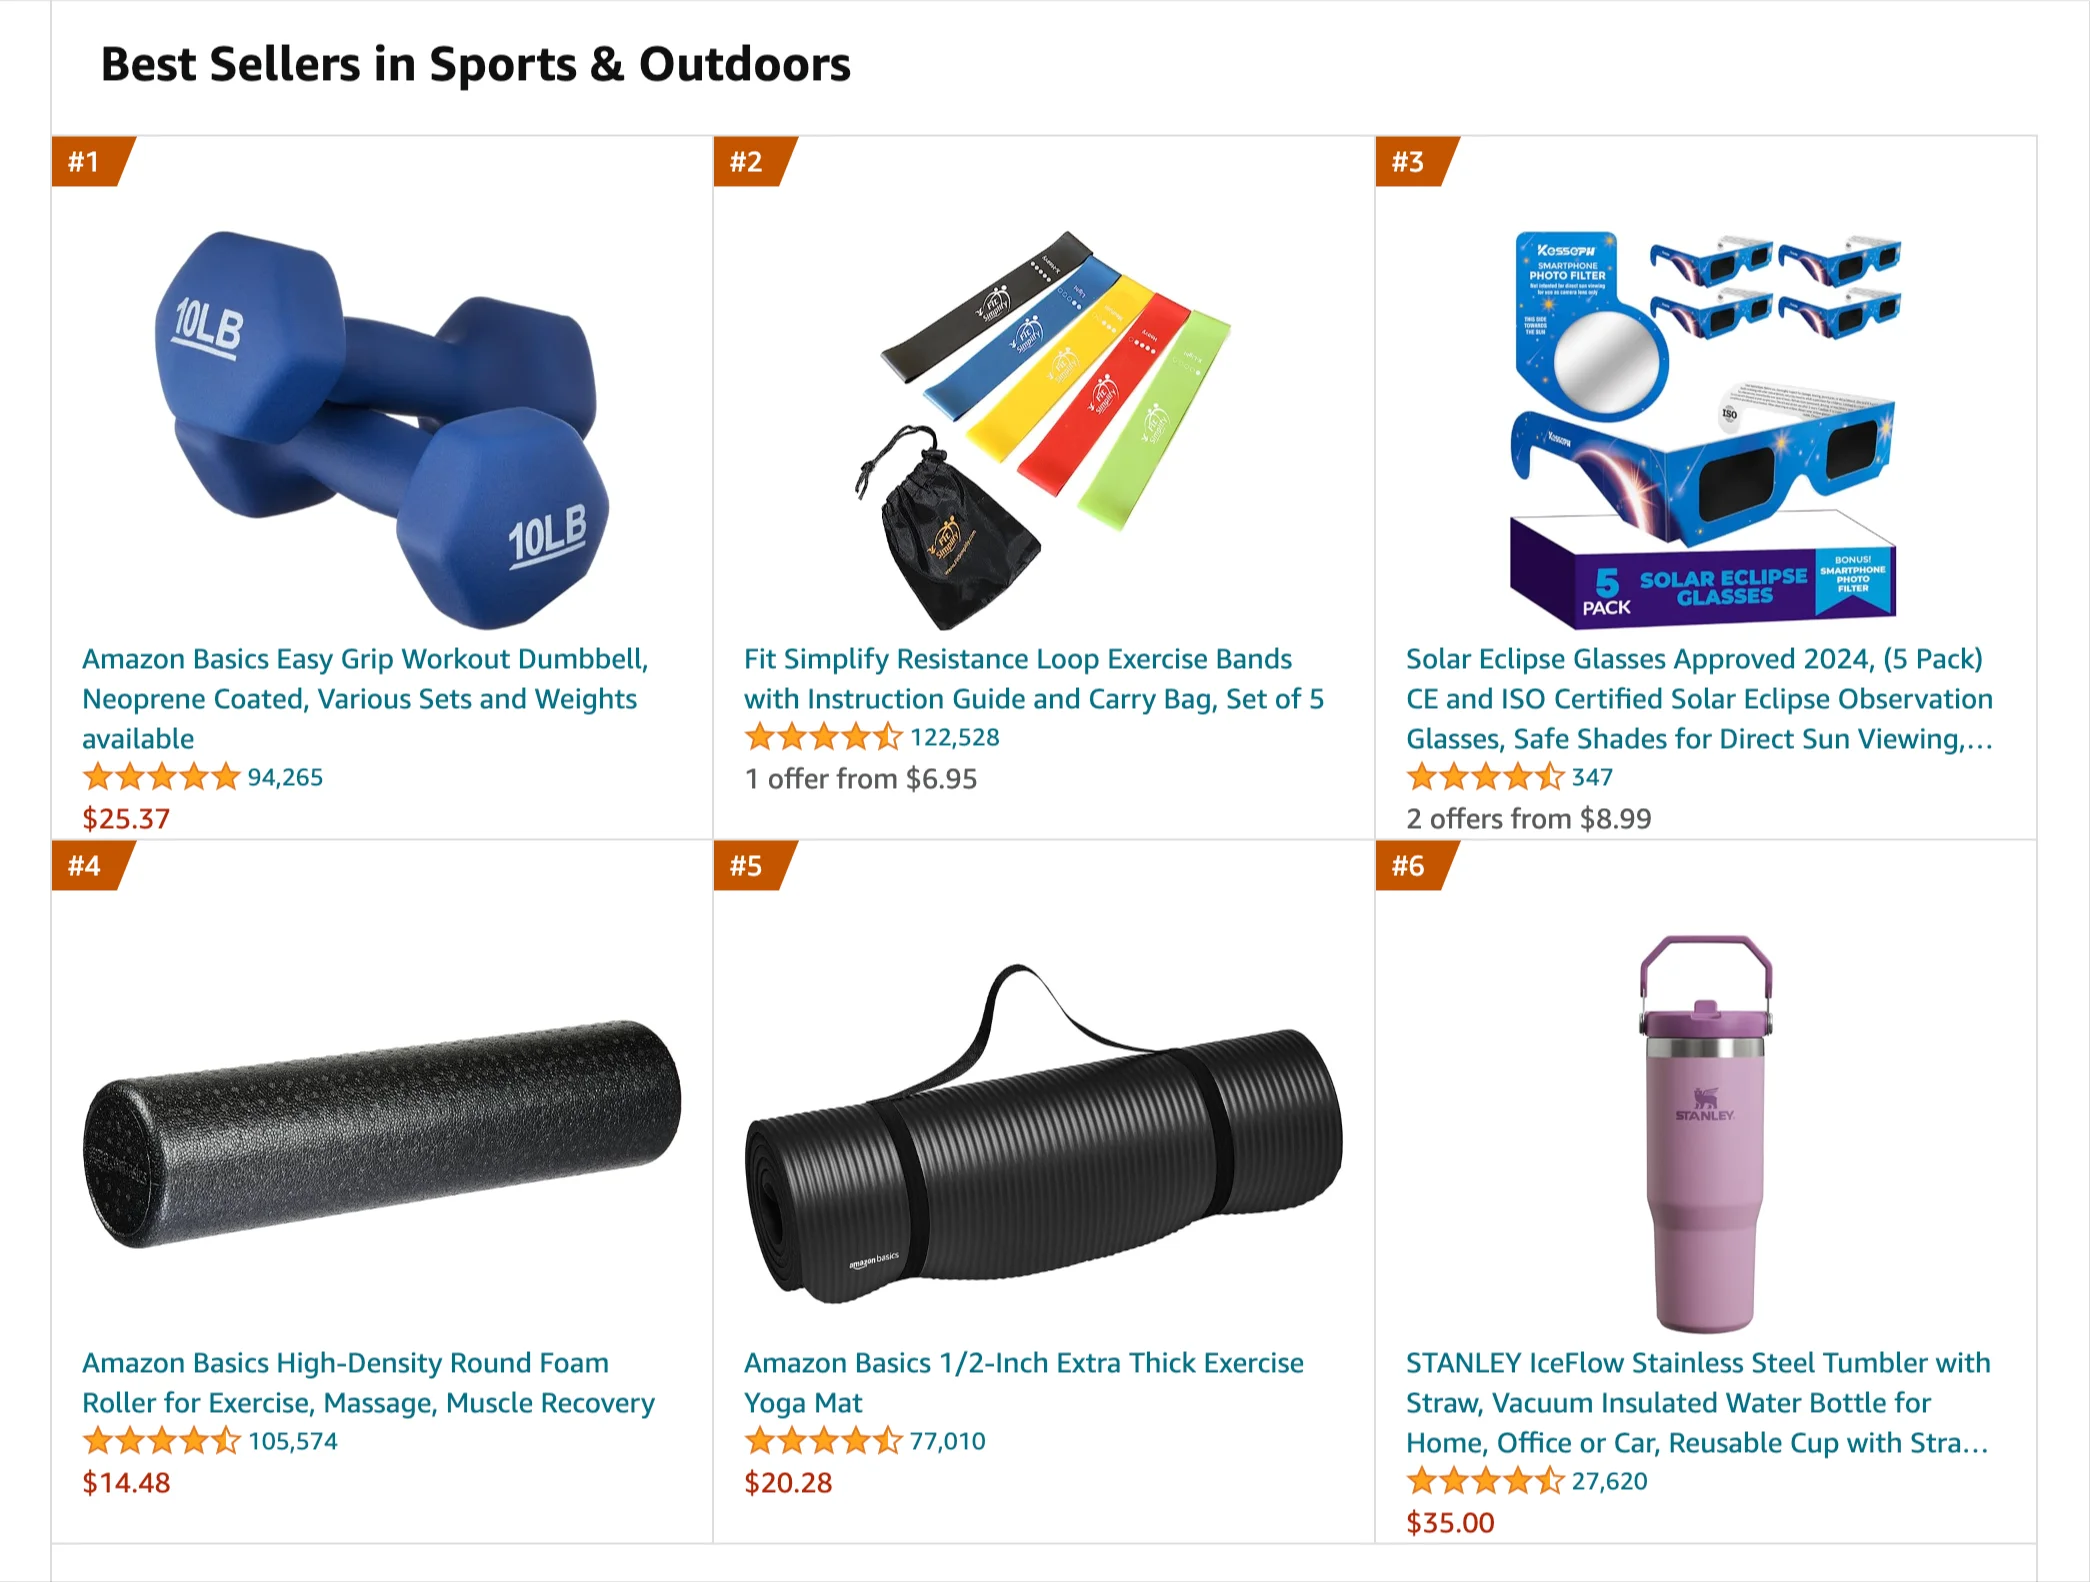 Best sellers in Sports & Outdoors